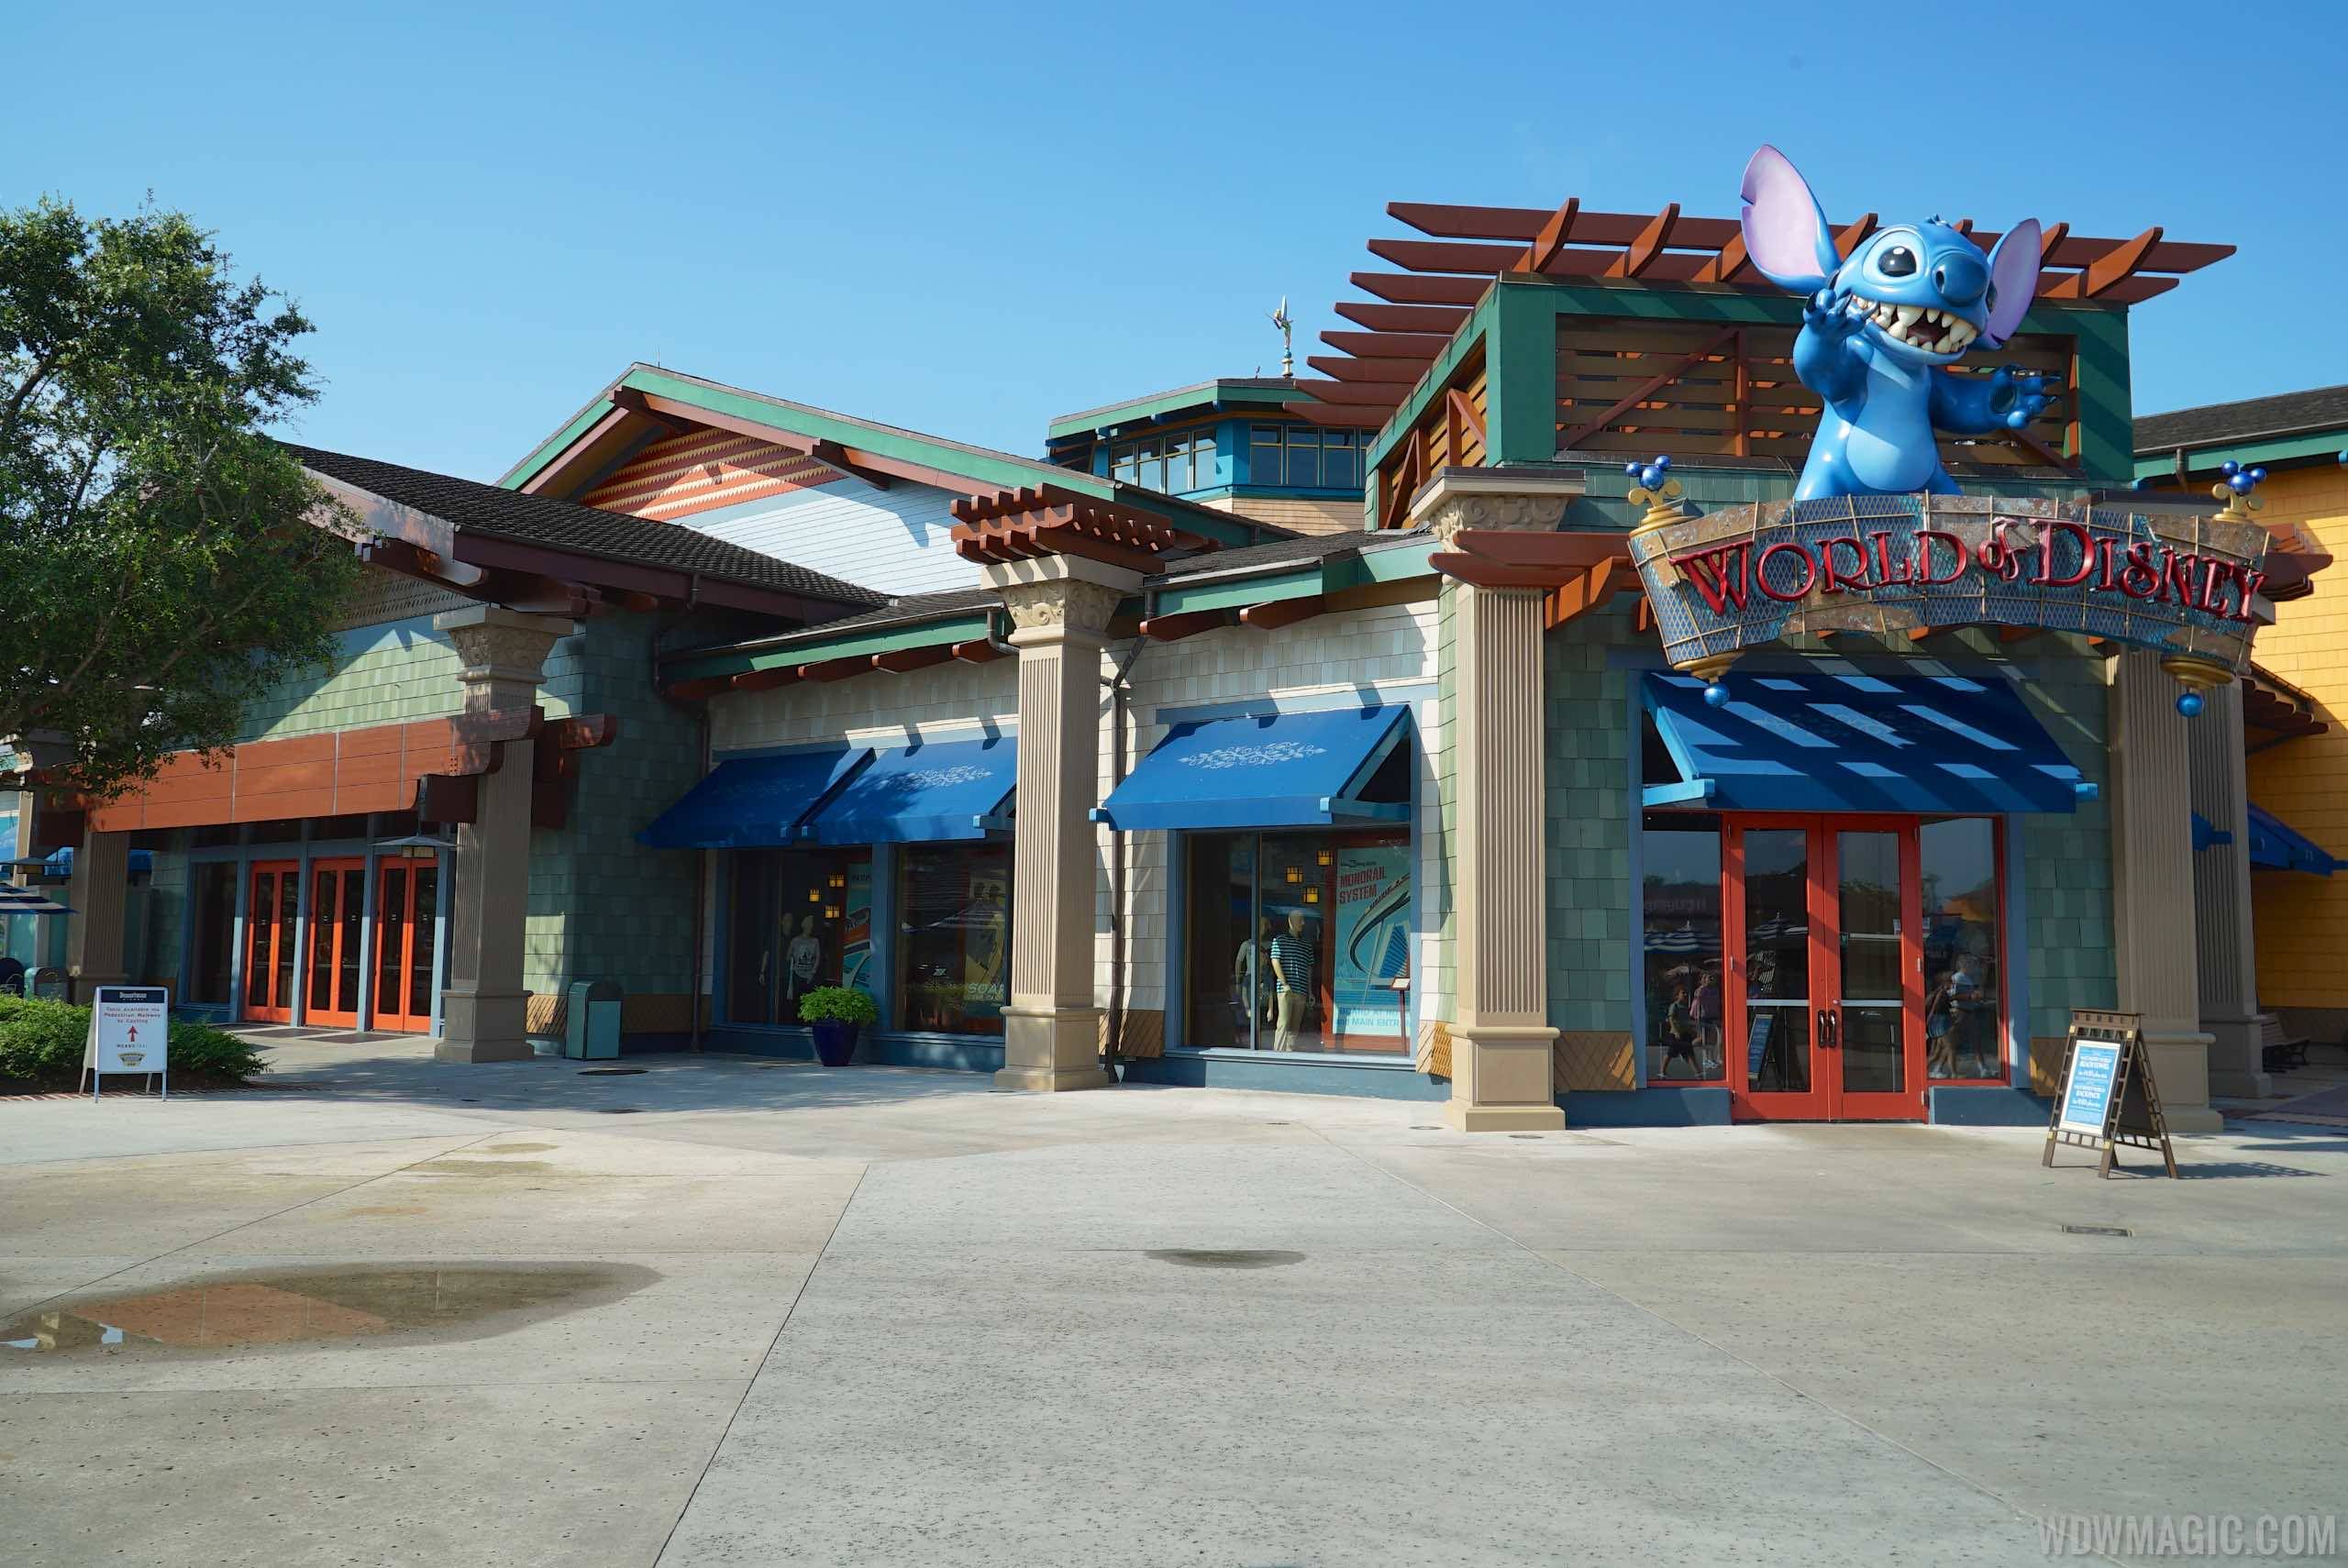 PHOTOS - New look color scheme for World of Disney at Disney Springs